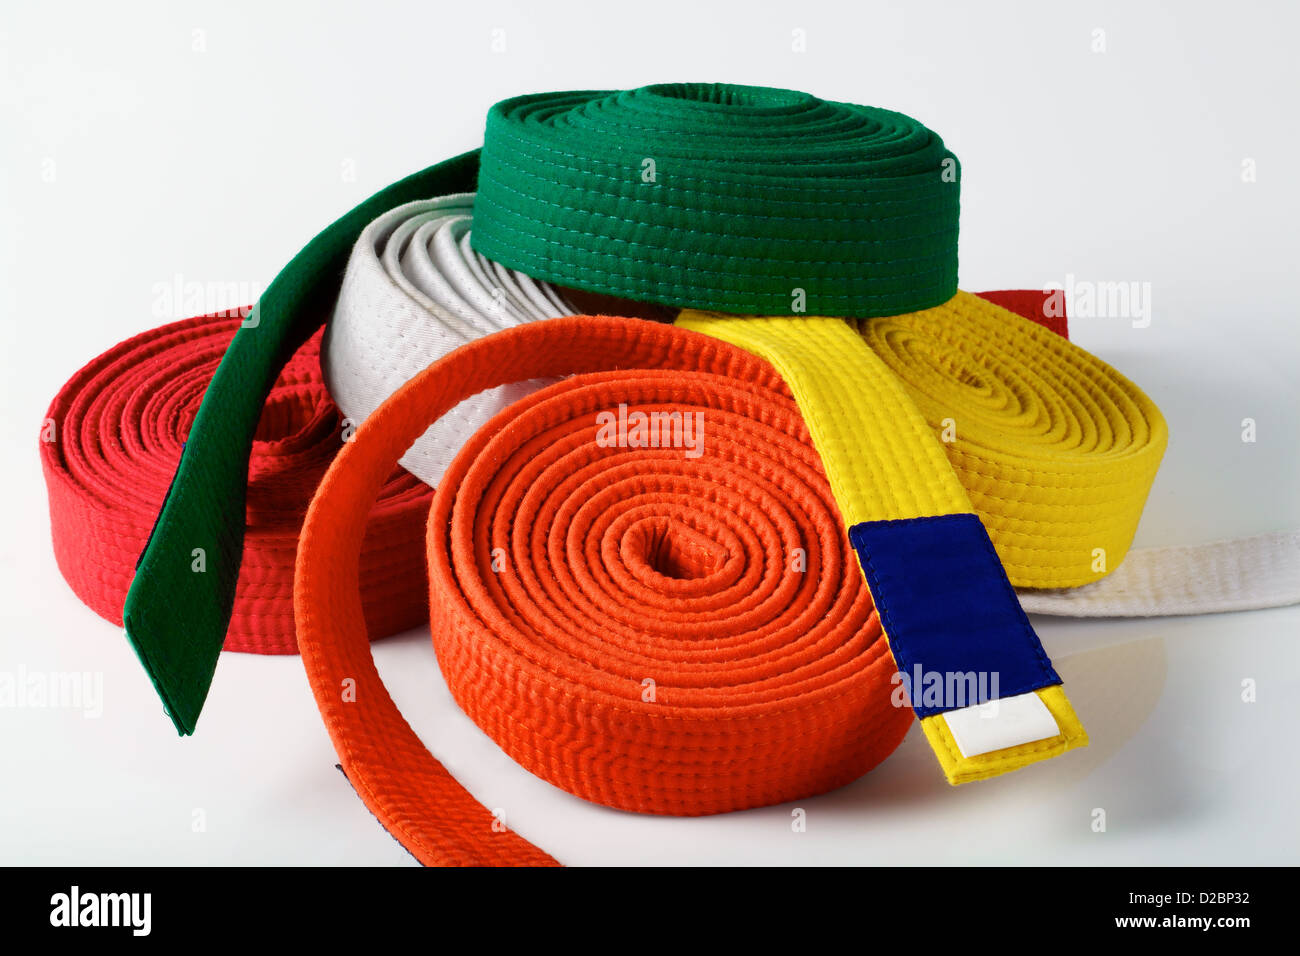 Colored karate belts on white Stock Photo